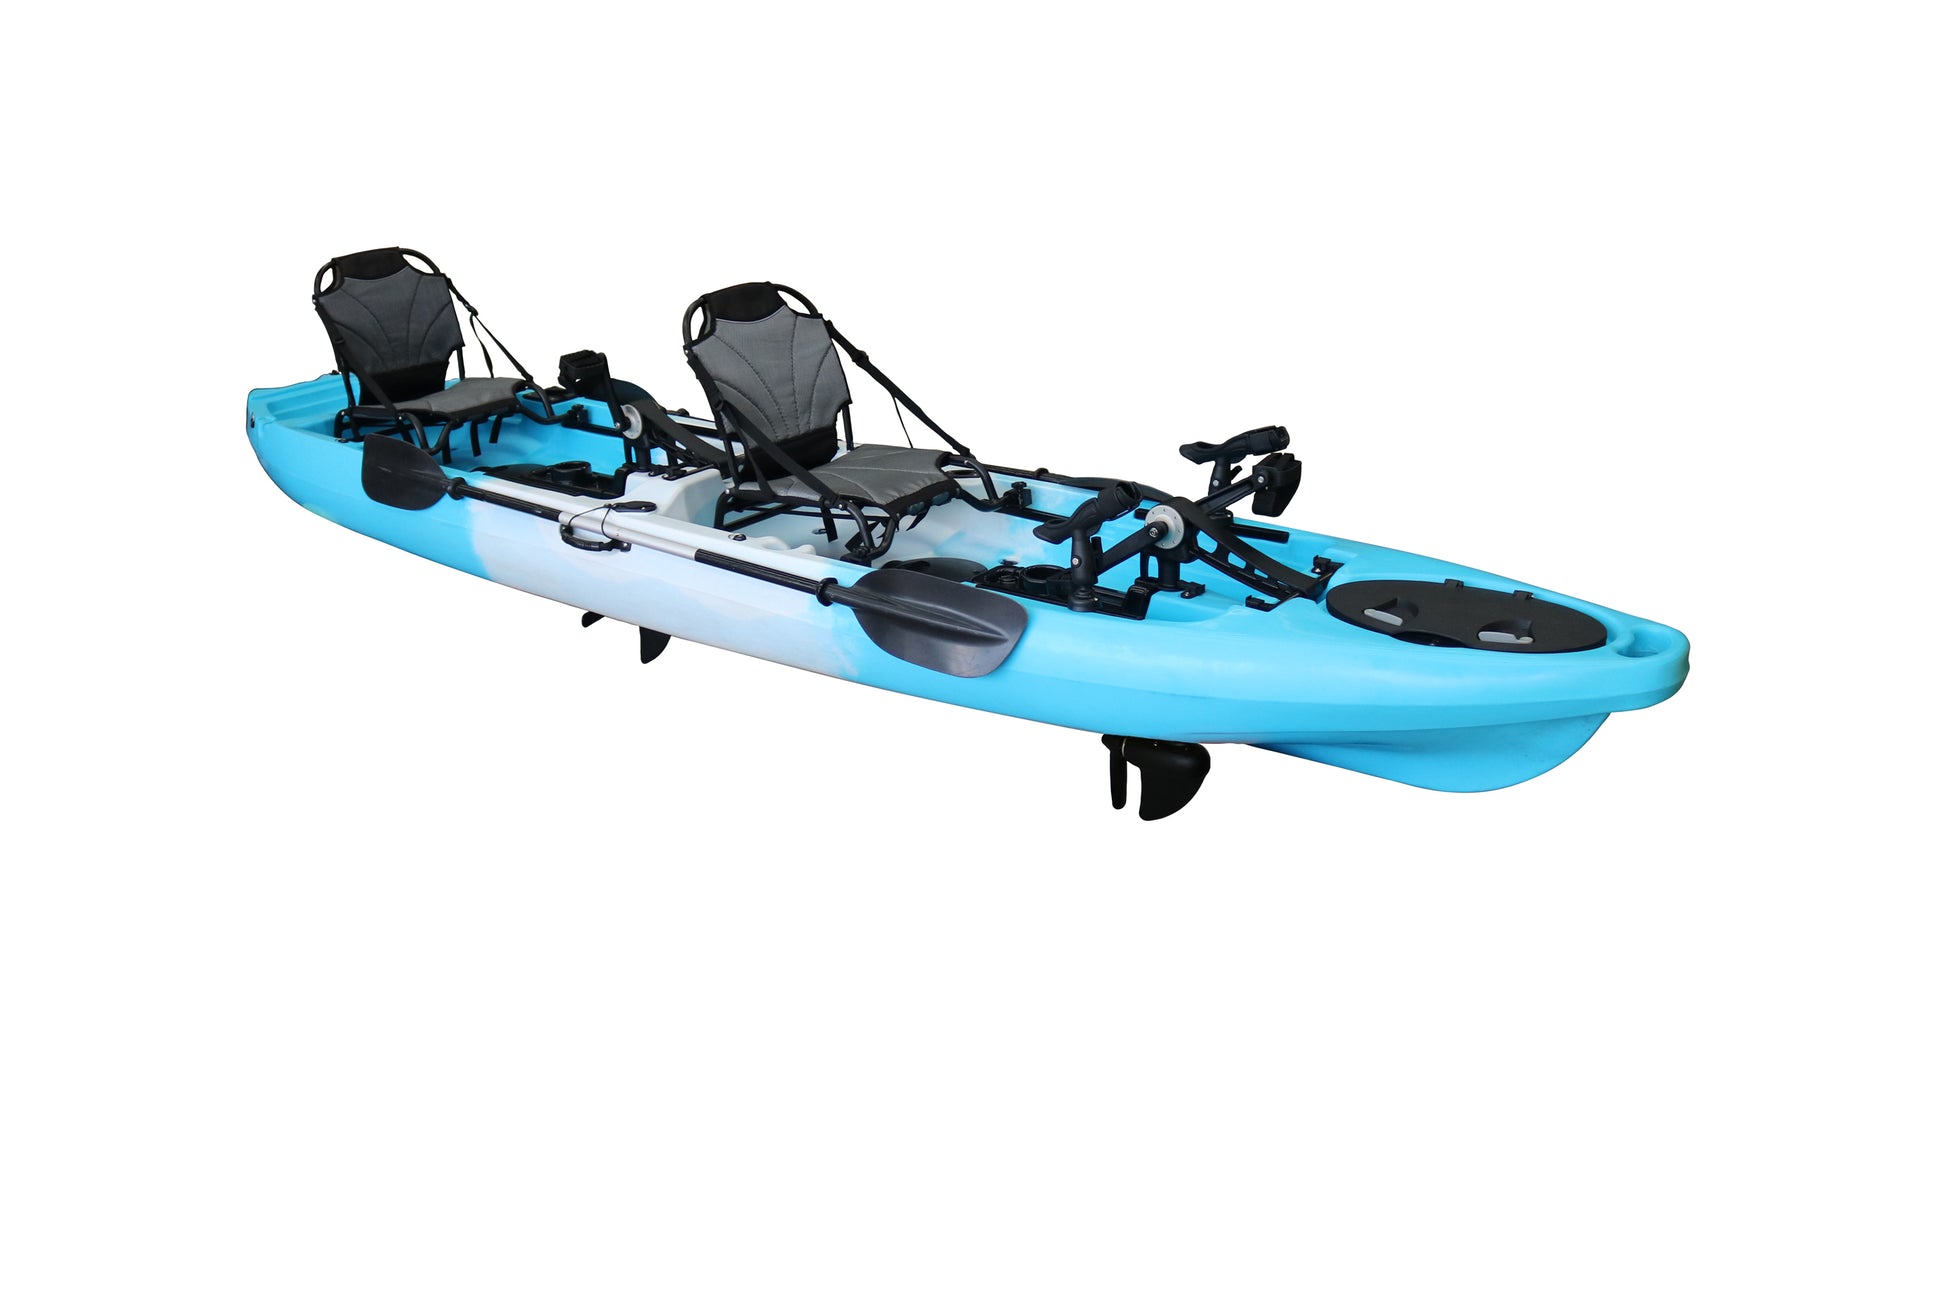 13.5' Recon Fin Drive Double Fishing Kayak | 575bs capacity | ultimate